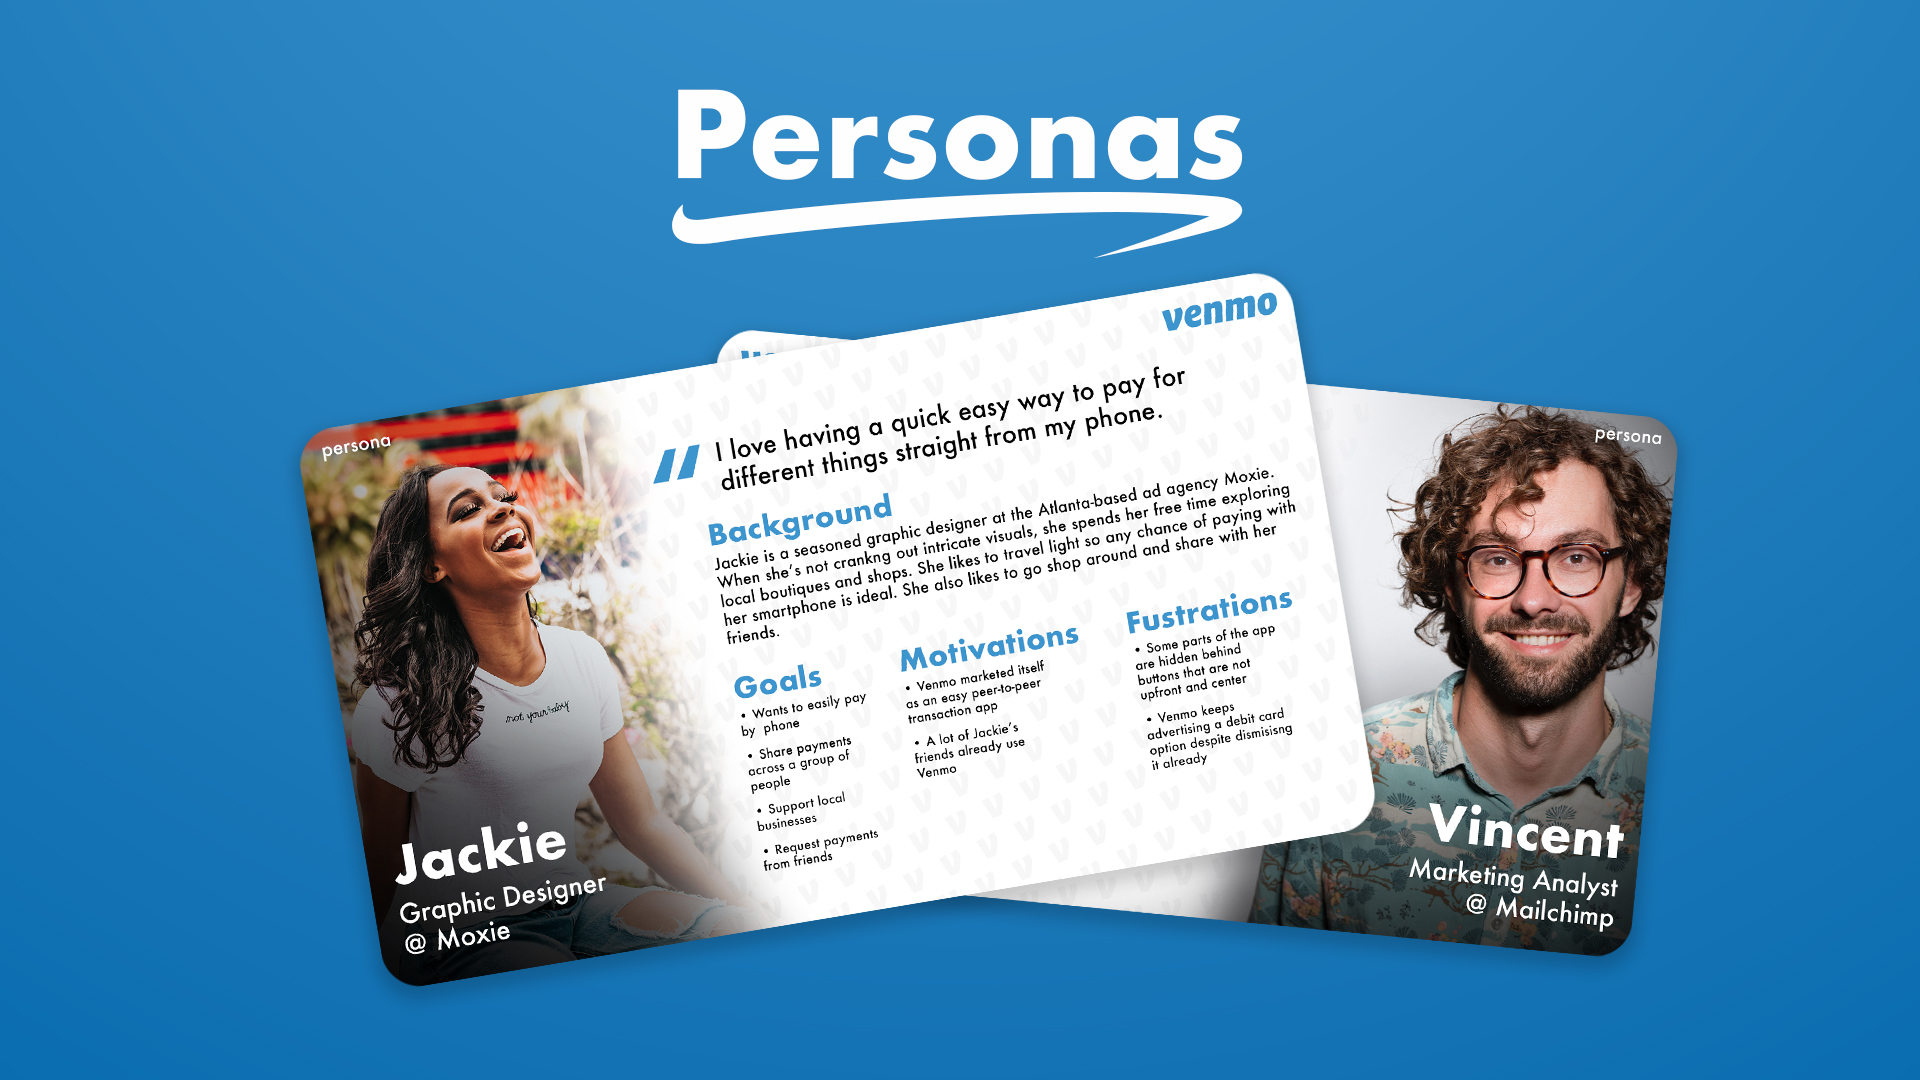 Persona cards for a project in JRMC 7010